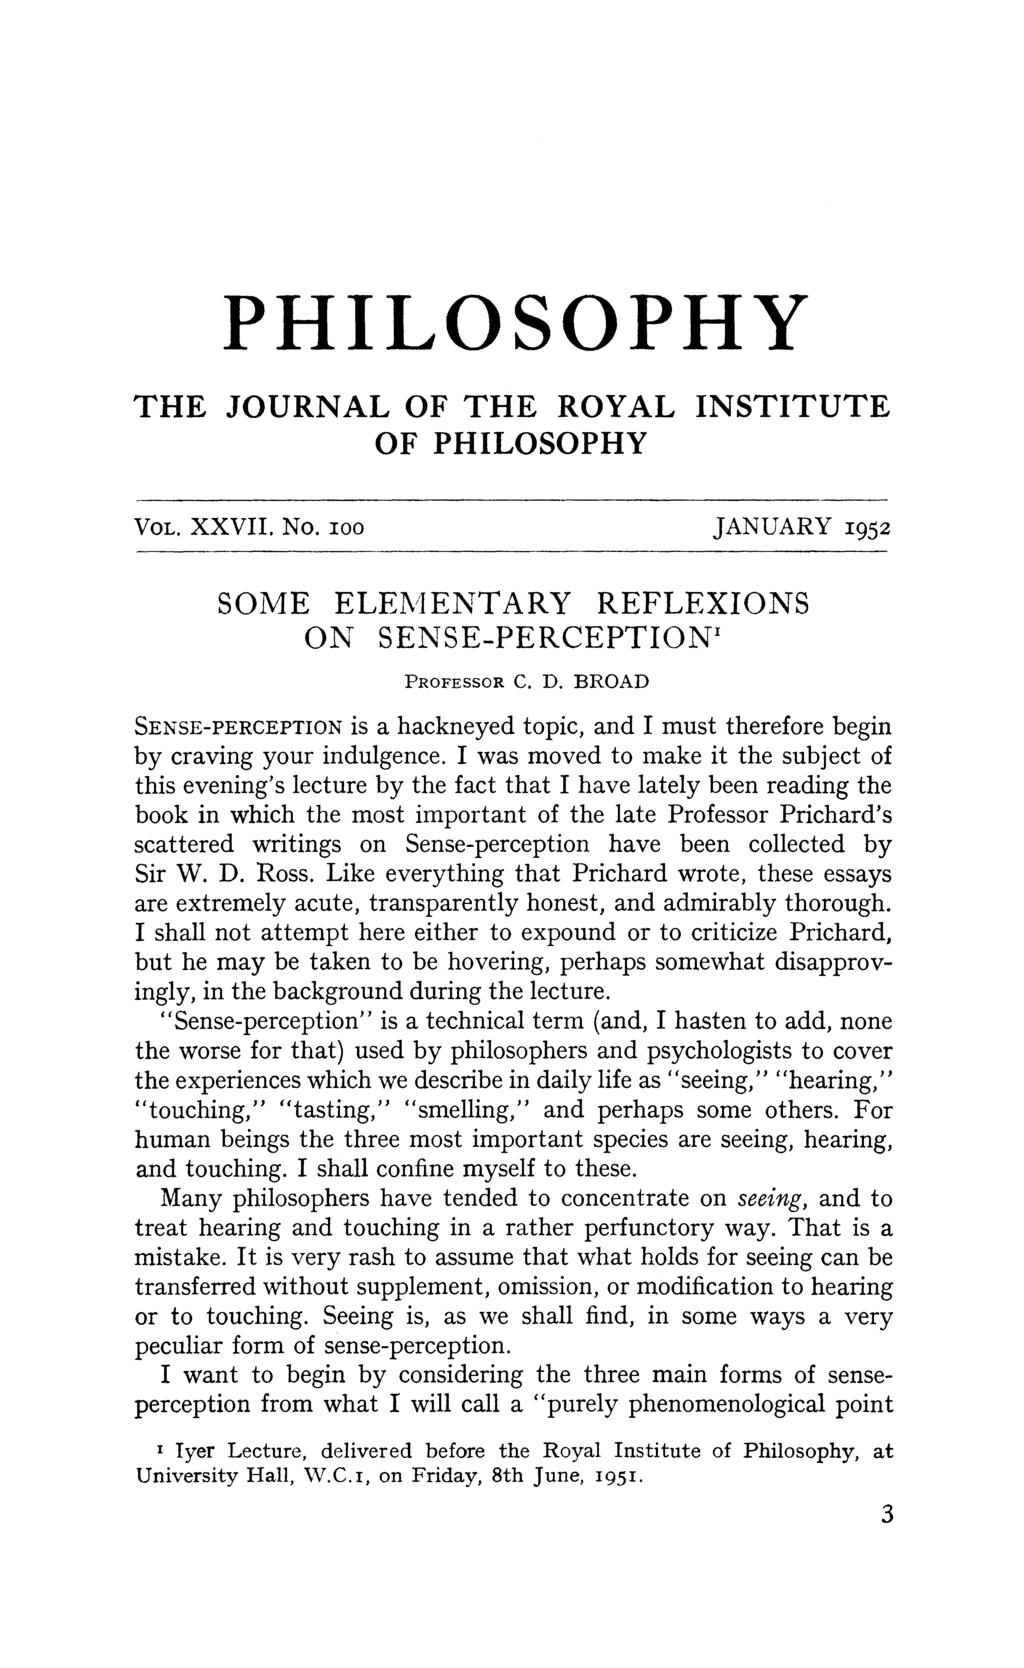 PHILOSOPHY THE JOURNAL OF THE ROYAL INSTITUTE OF PHILOSOPHY VOL. XXVII. No. Ioo JANUARY I952 SOME ELEMIENTARY REFLEXIONS ON SENSE-PERCEPTIONI PROFESSOR C. D.